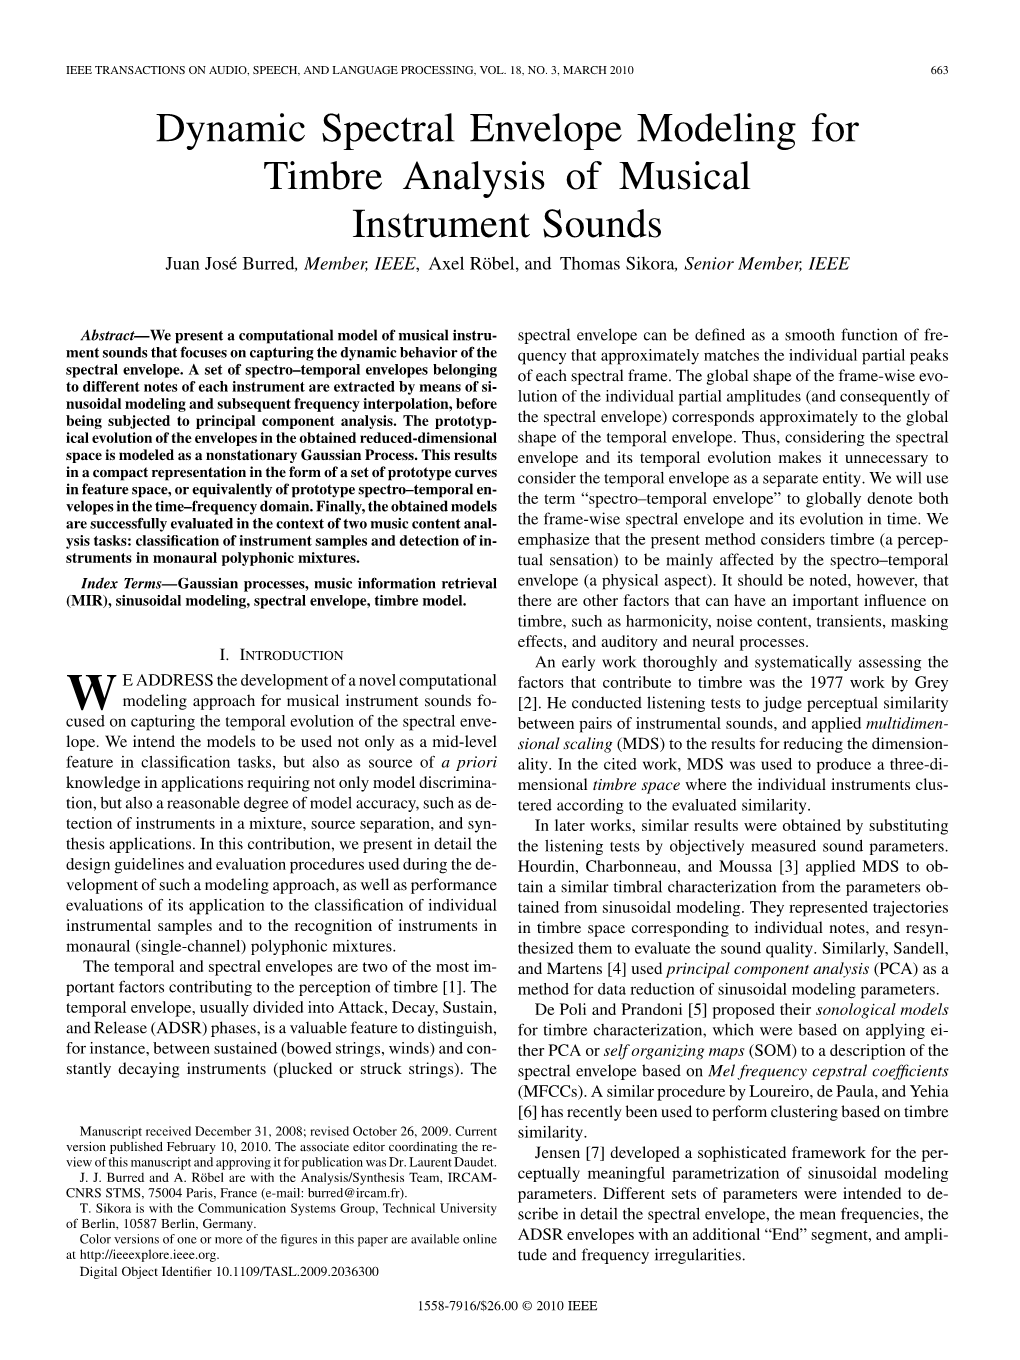 Dynamic Spectral Envelope Modeling for Timbre Analysis of Musical Instrument Sounds Juan José Burred, Member, IEEE, Axel Röbel, and Thomas Sikora, Senior Member, IEEE